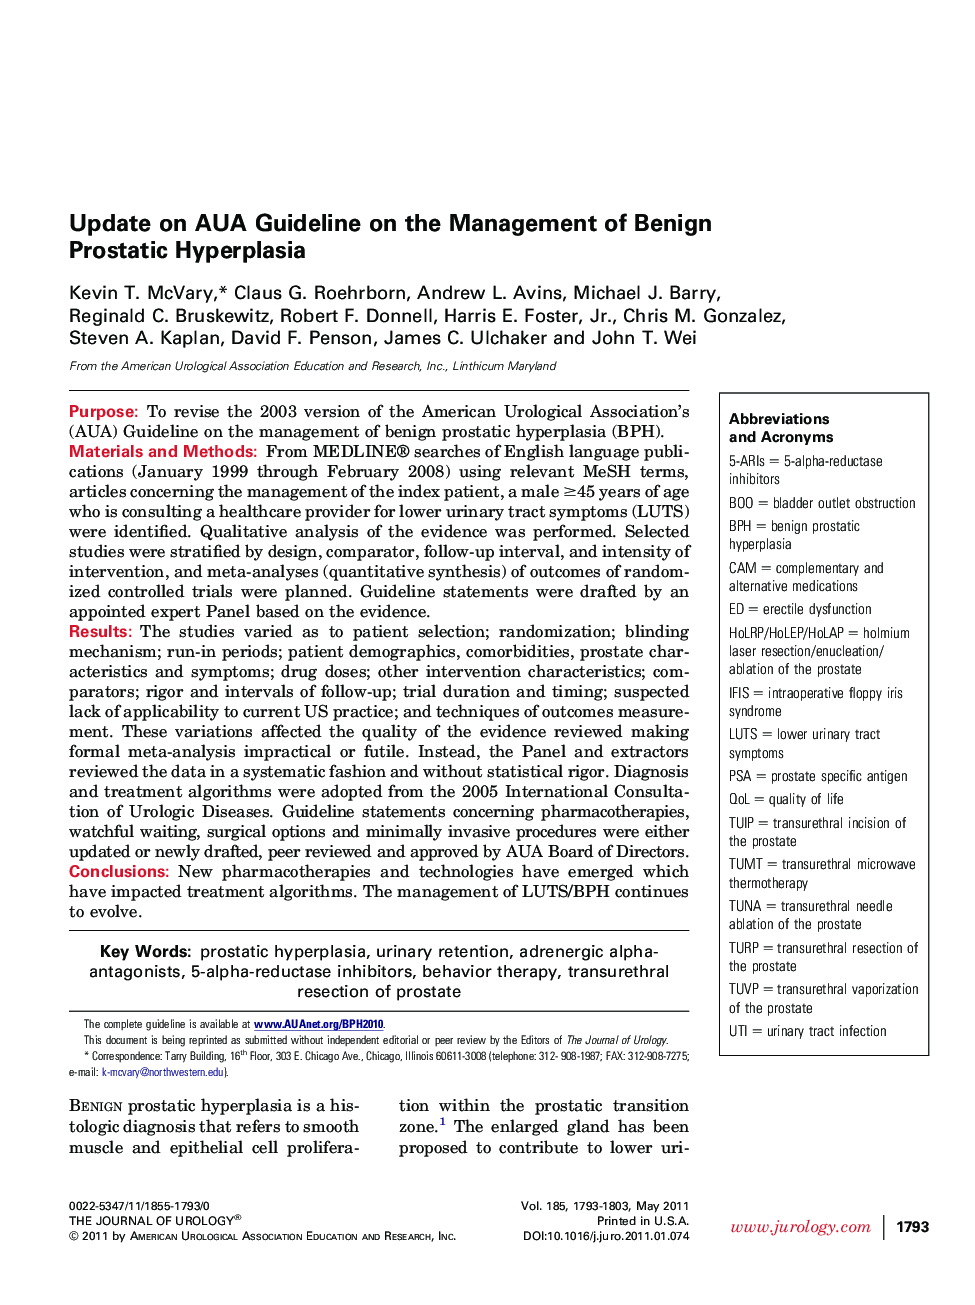 Update on AUA Guideline on the Management of Benign Prostatic Hyperplasia